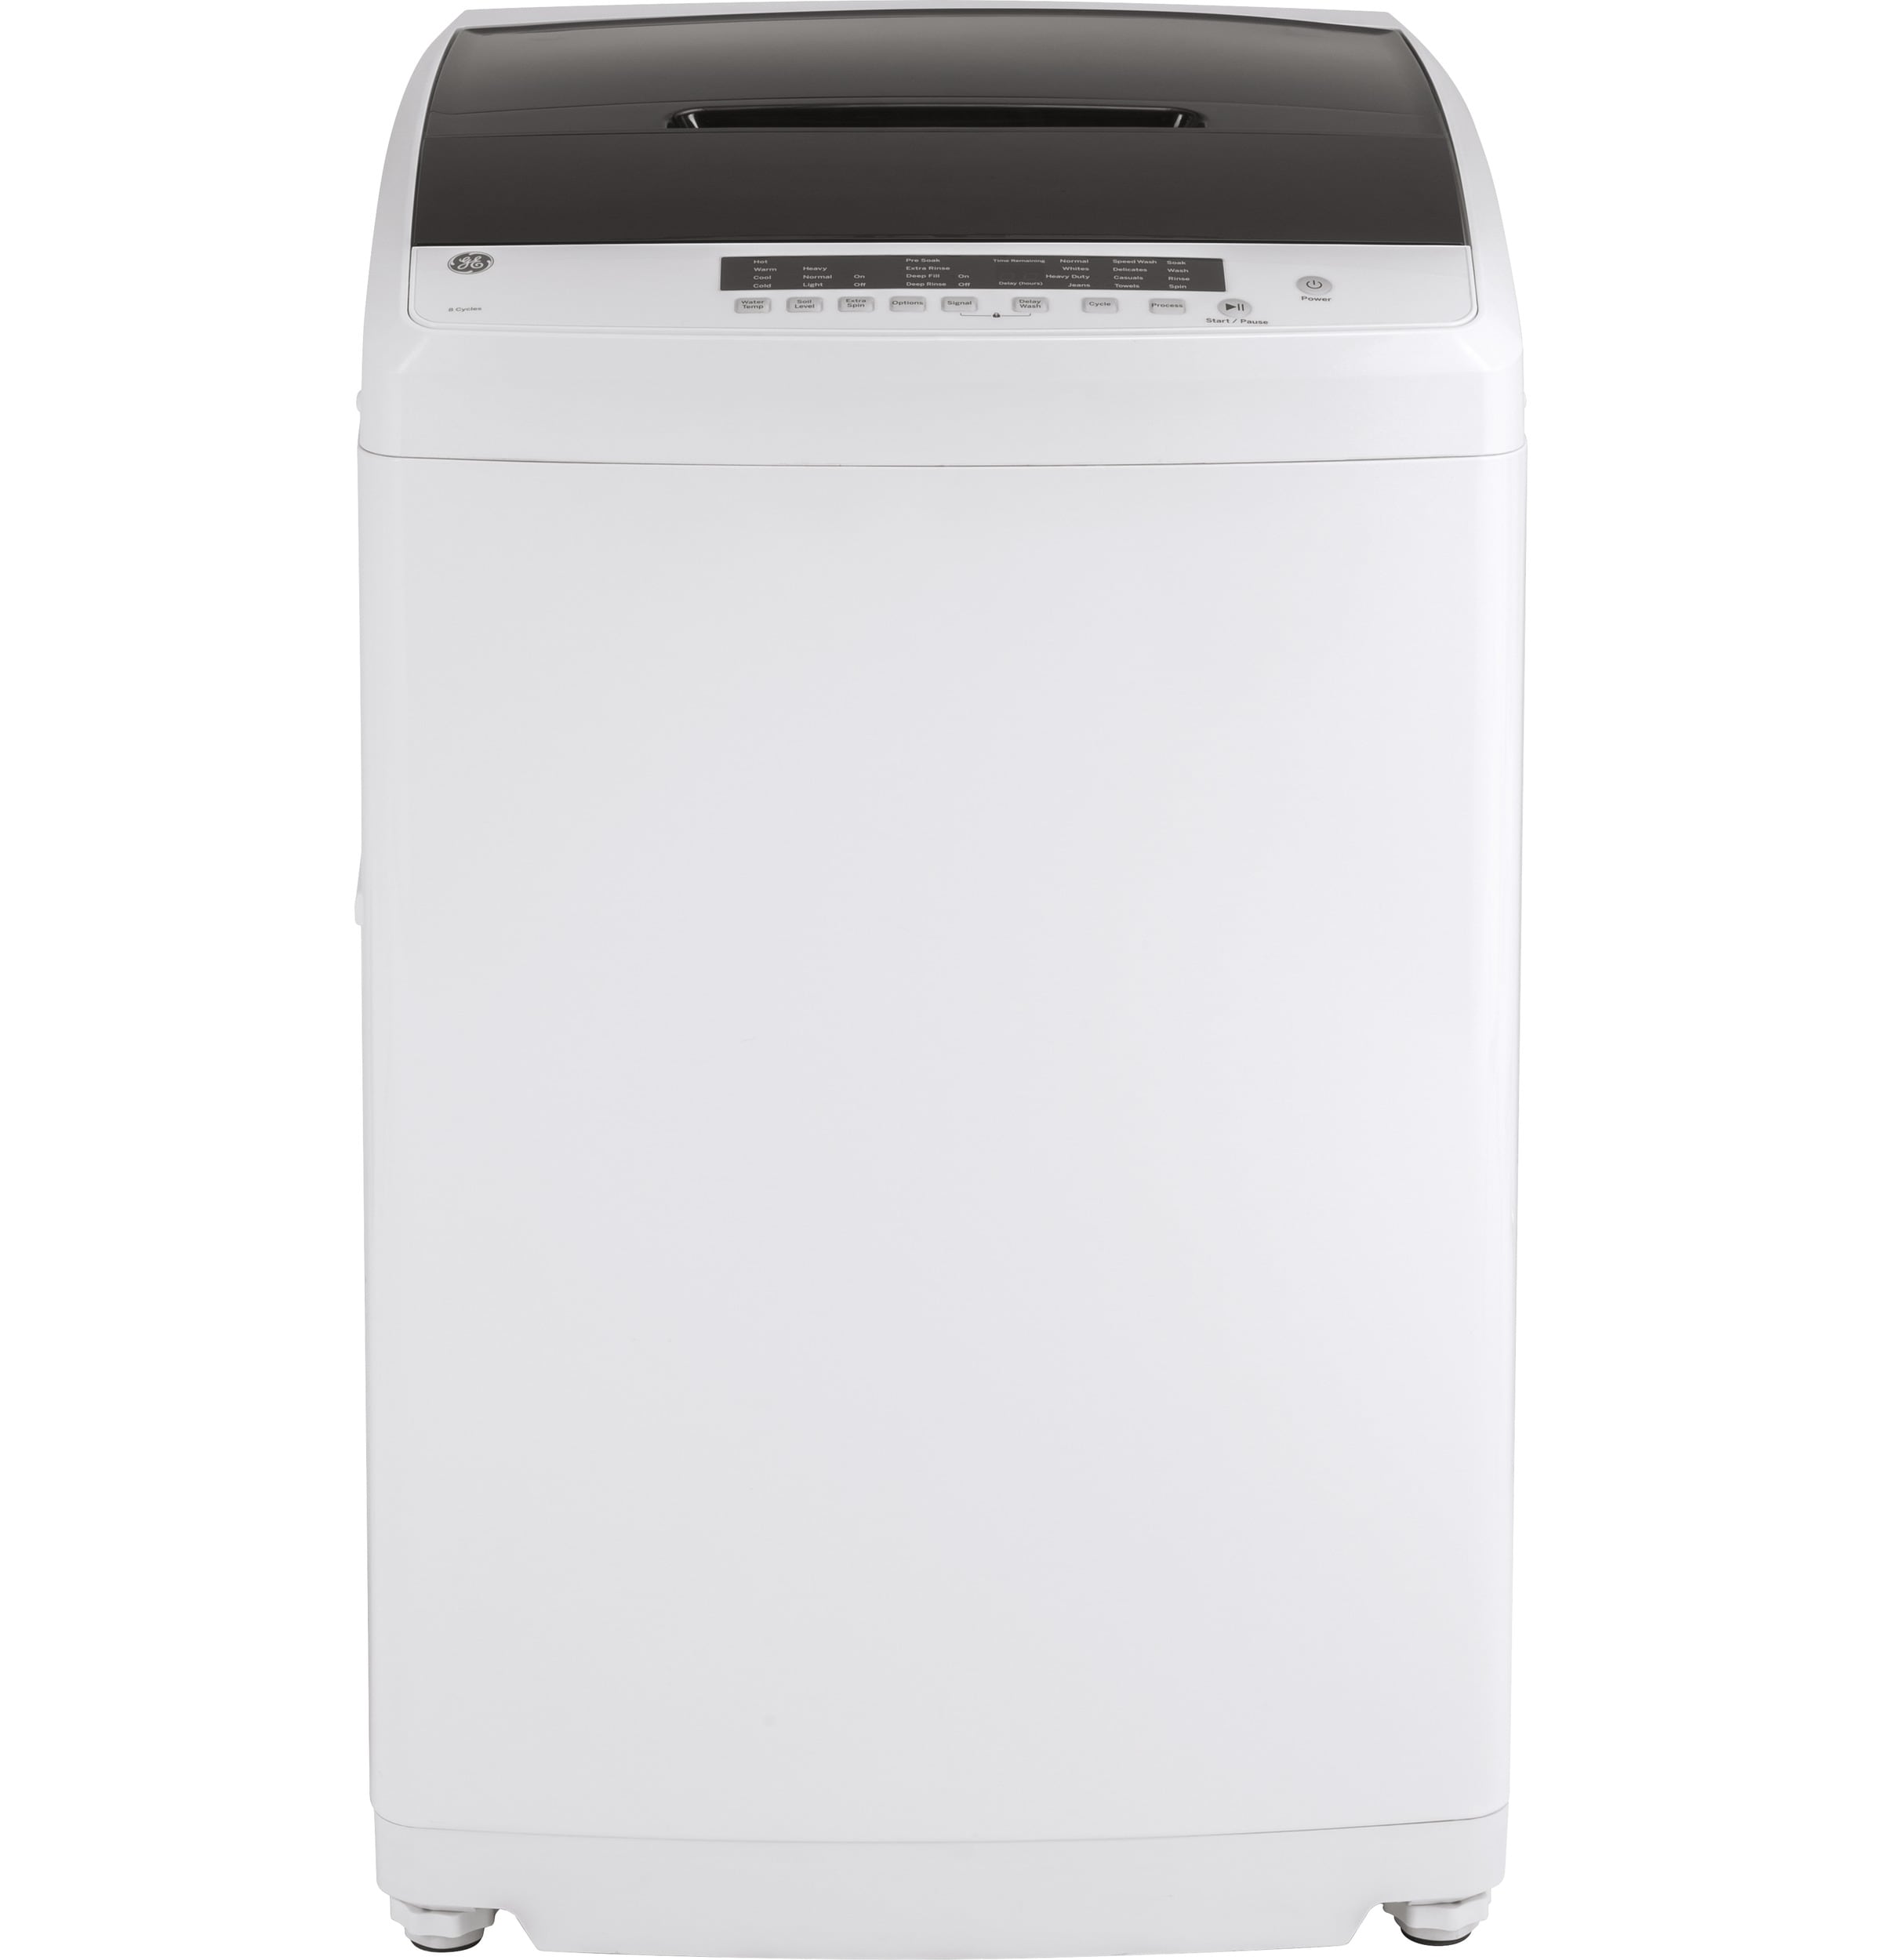 GE GNW128PSMWW 2.8 Cu. ft. Portable Washer, White